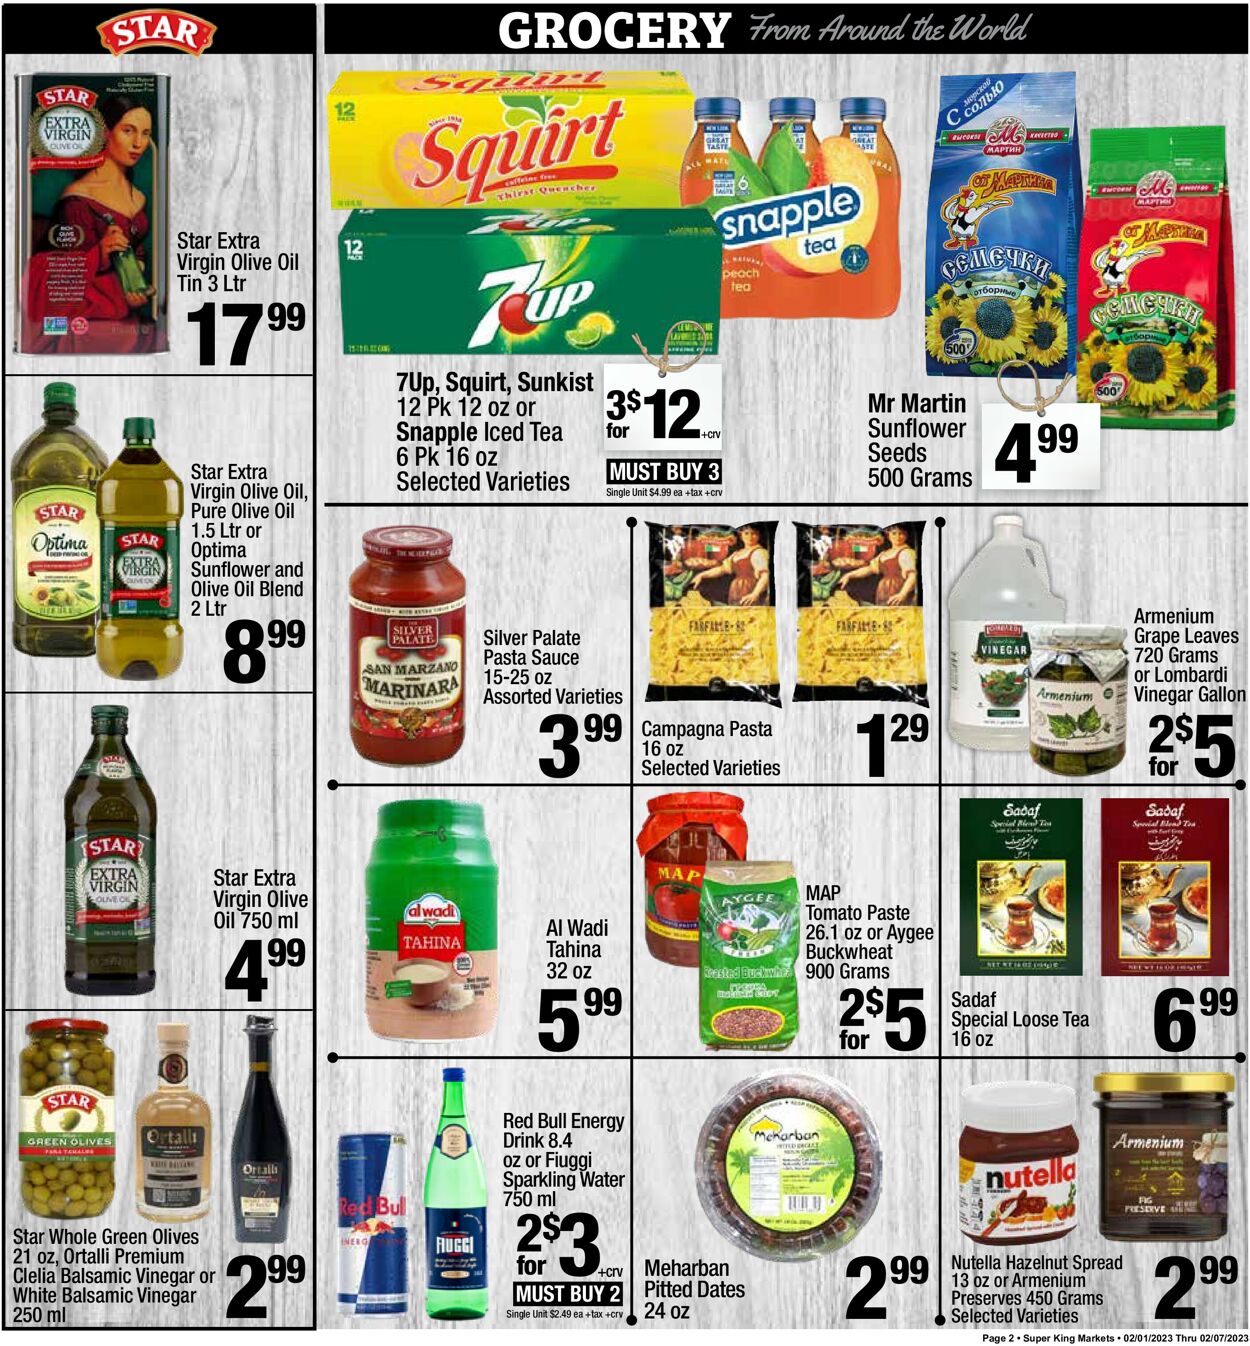 Catalogue Super King Market from 02/01/2023